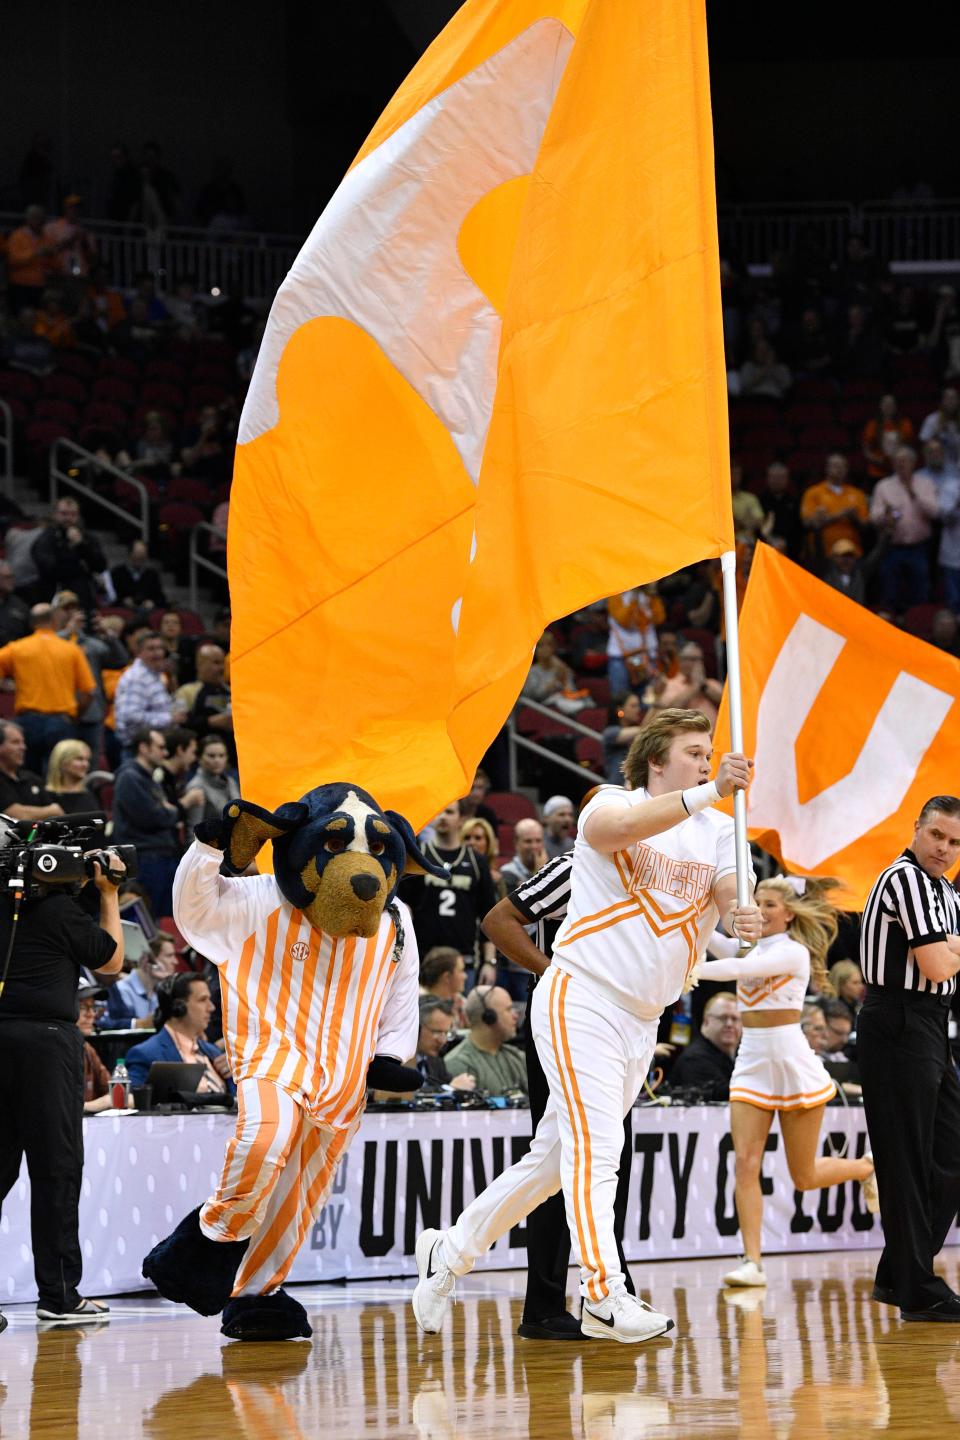 Smokey and the Tennessee cheerleaders perform during a 2019 NCAA Tournament game.